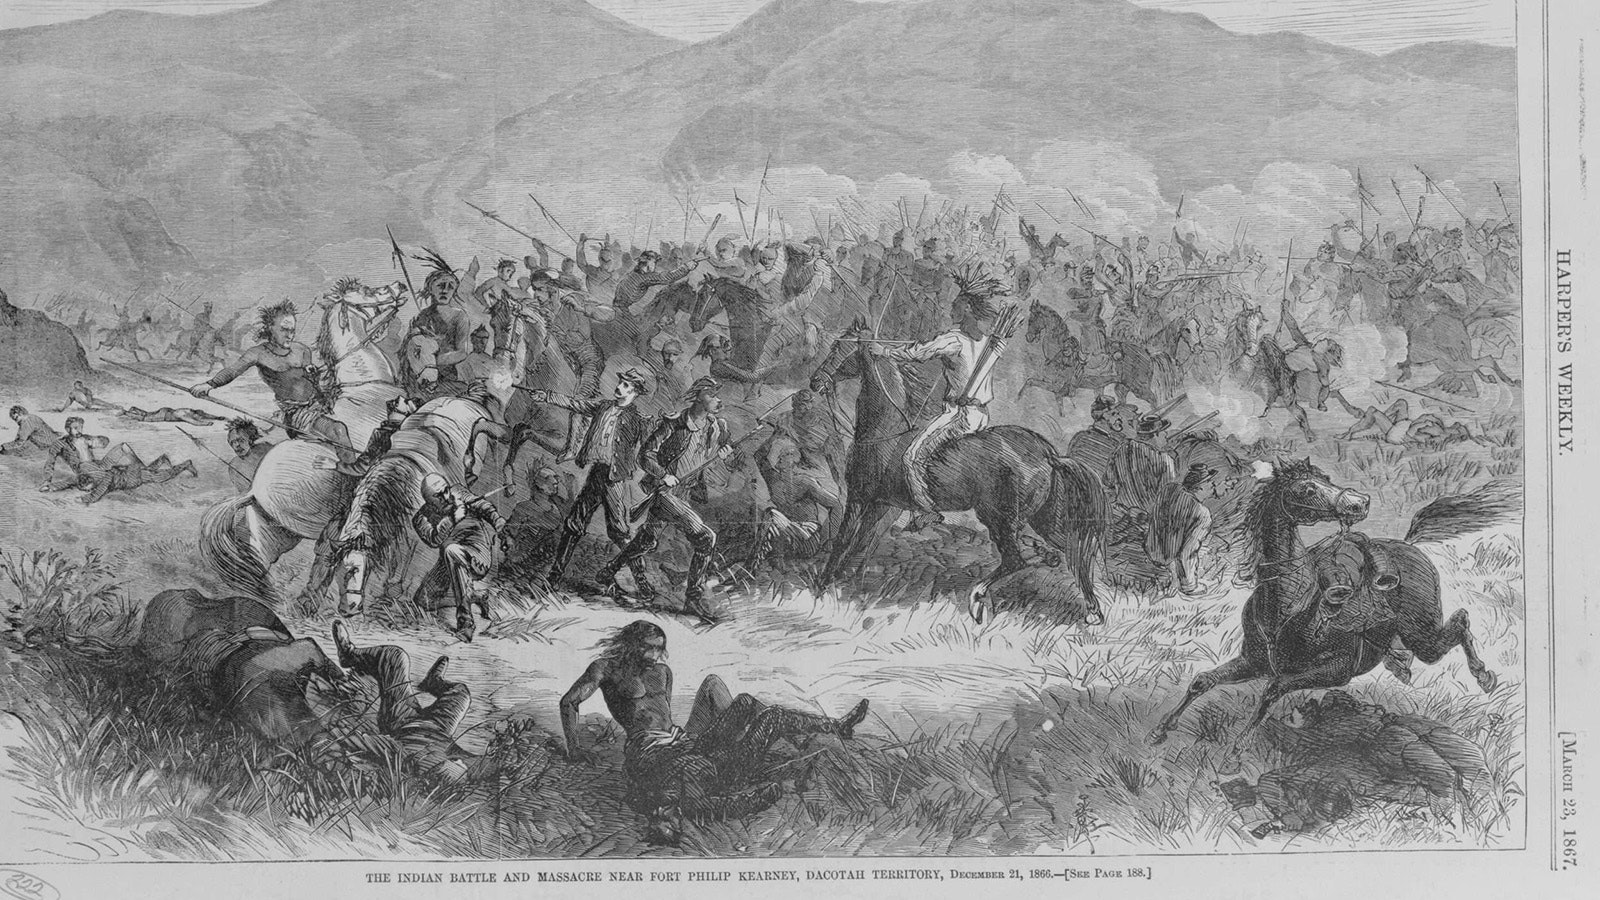 An illustration depicting Fetterman's Massacre that was printed in Harper's Weekly on March 23, 1867. The battle was Dec. 21, 1866.